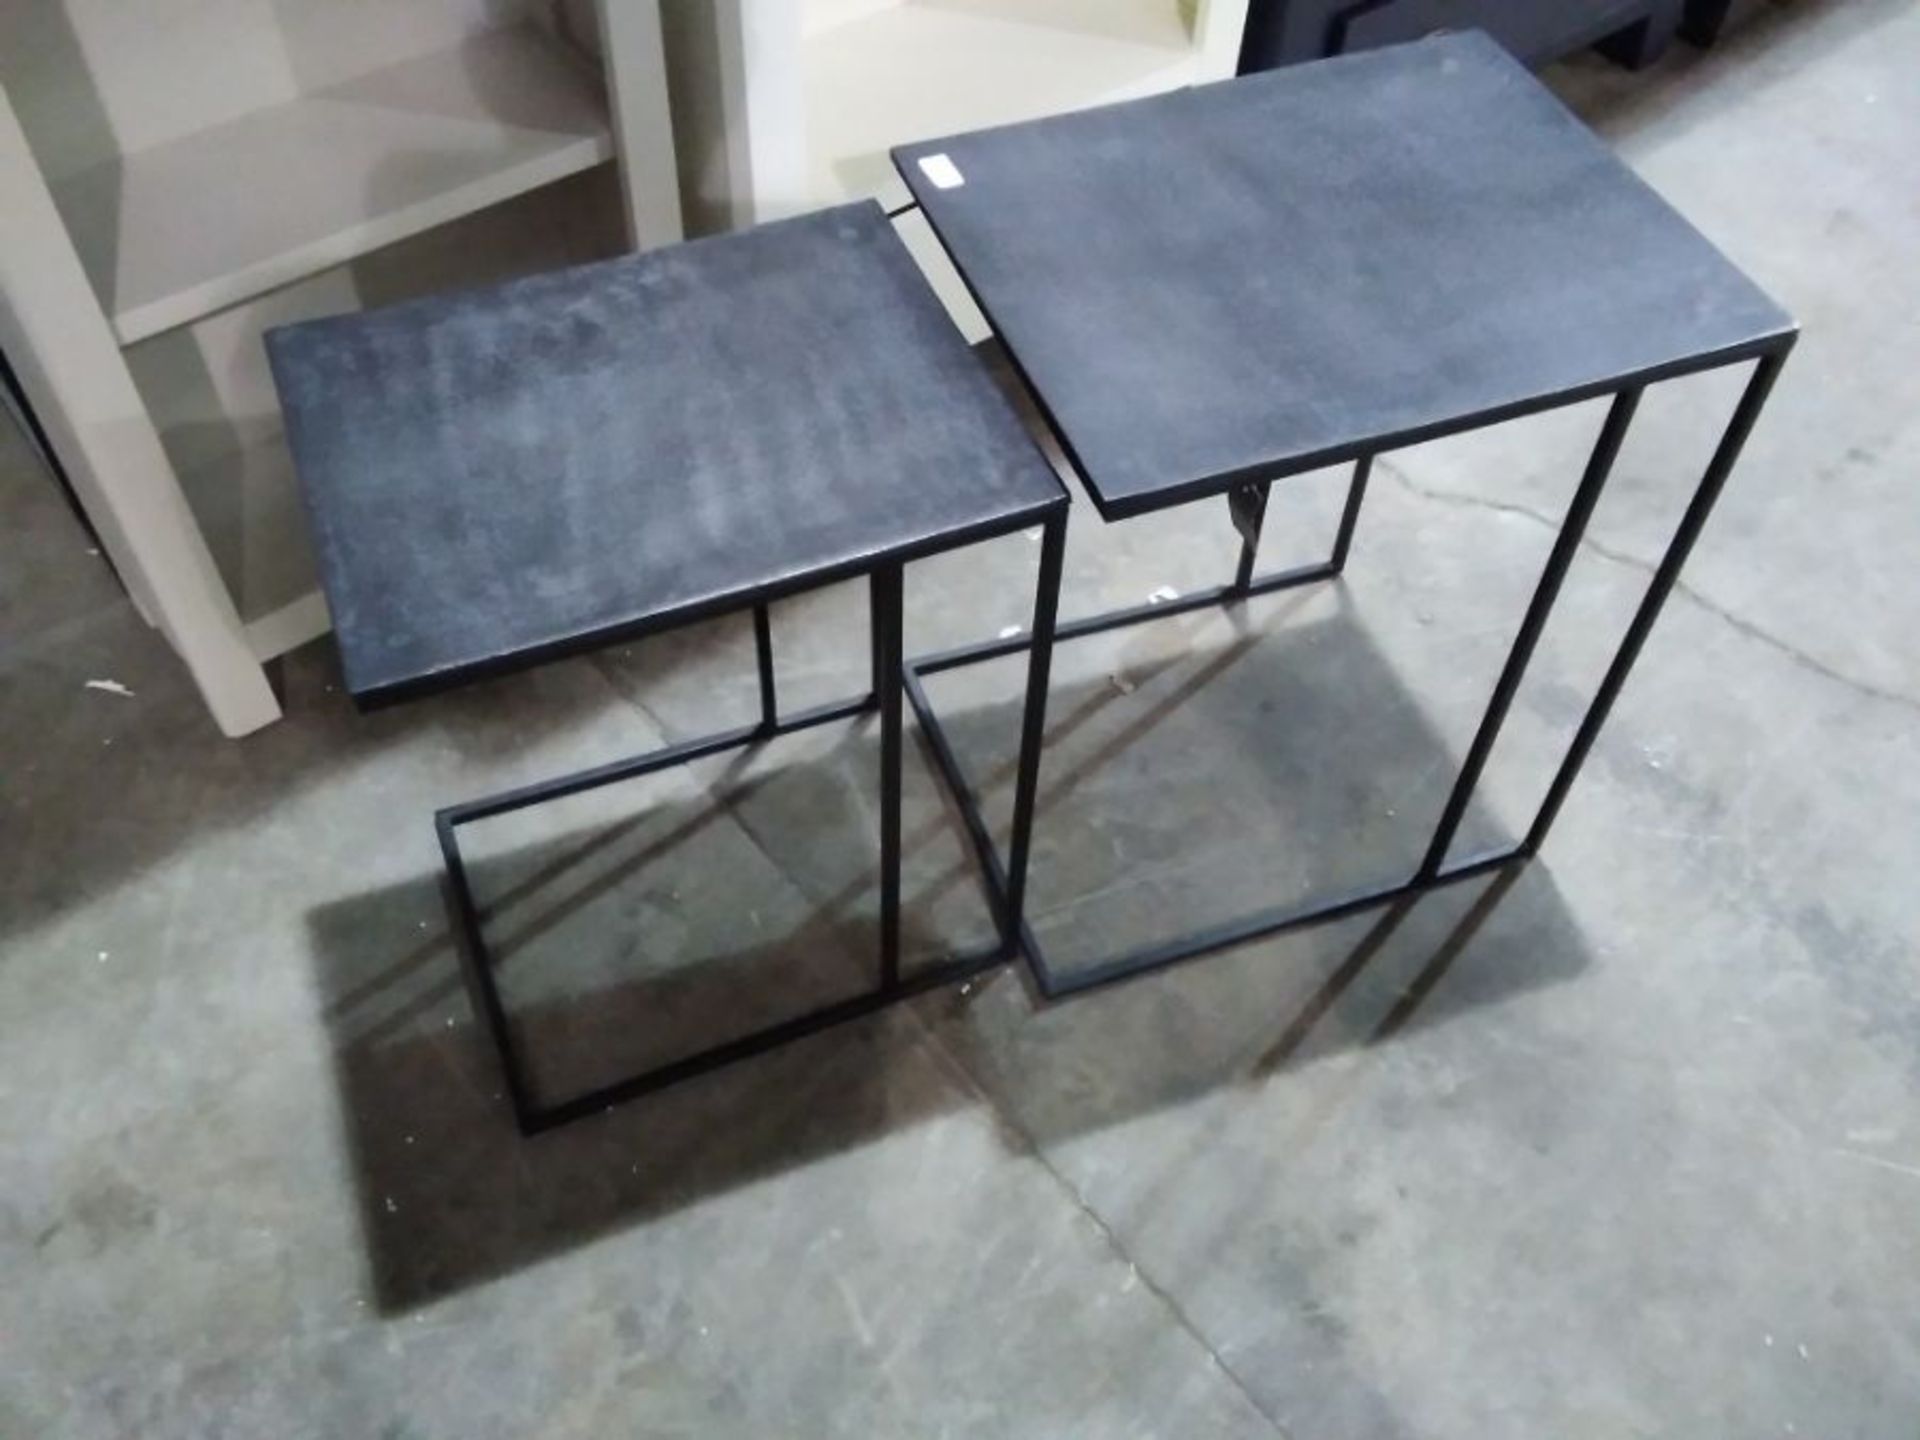 Luna Graphite Textured Aluminium set of 2 side tables (1 -QC 9 -704188)(FAULTY) - Image 2 of 2